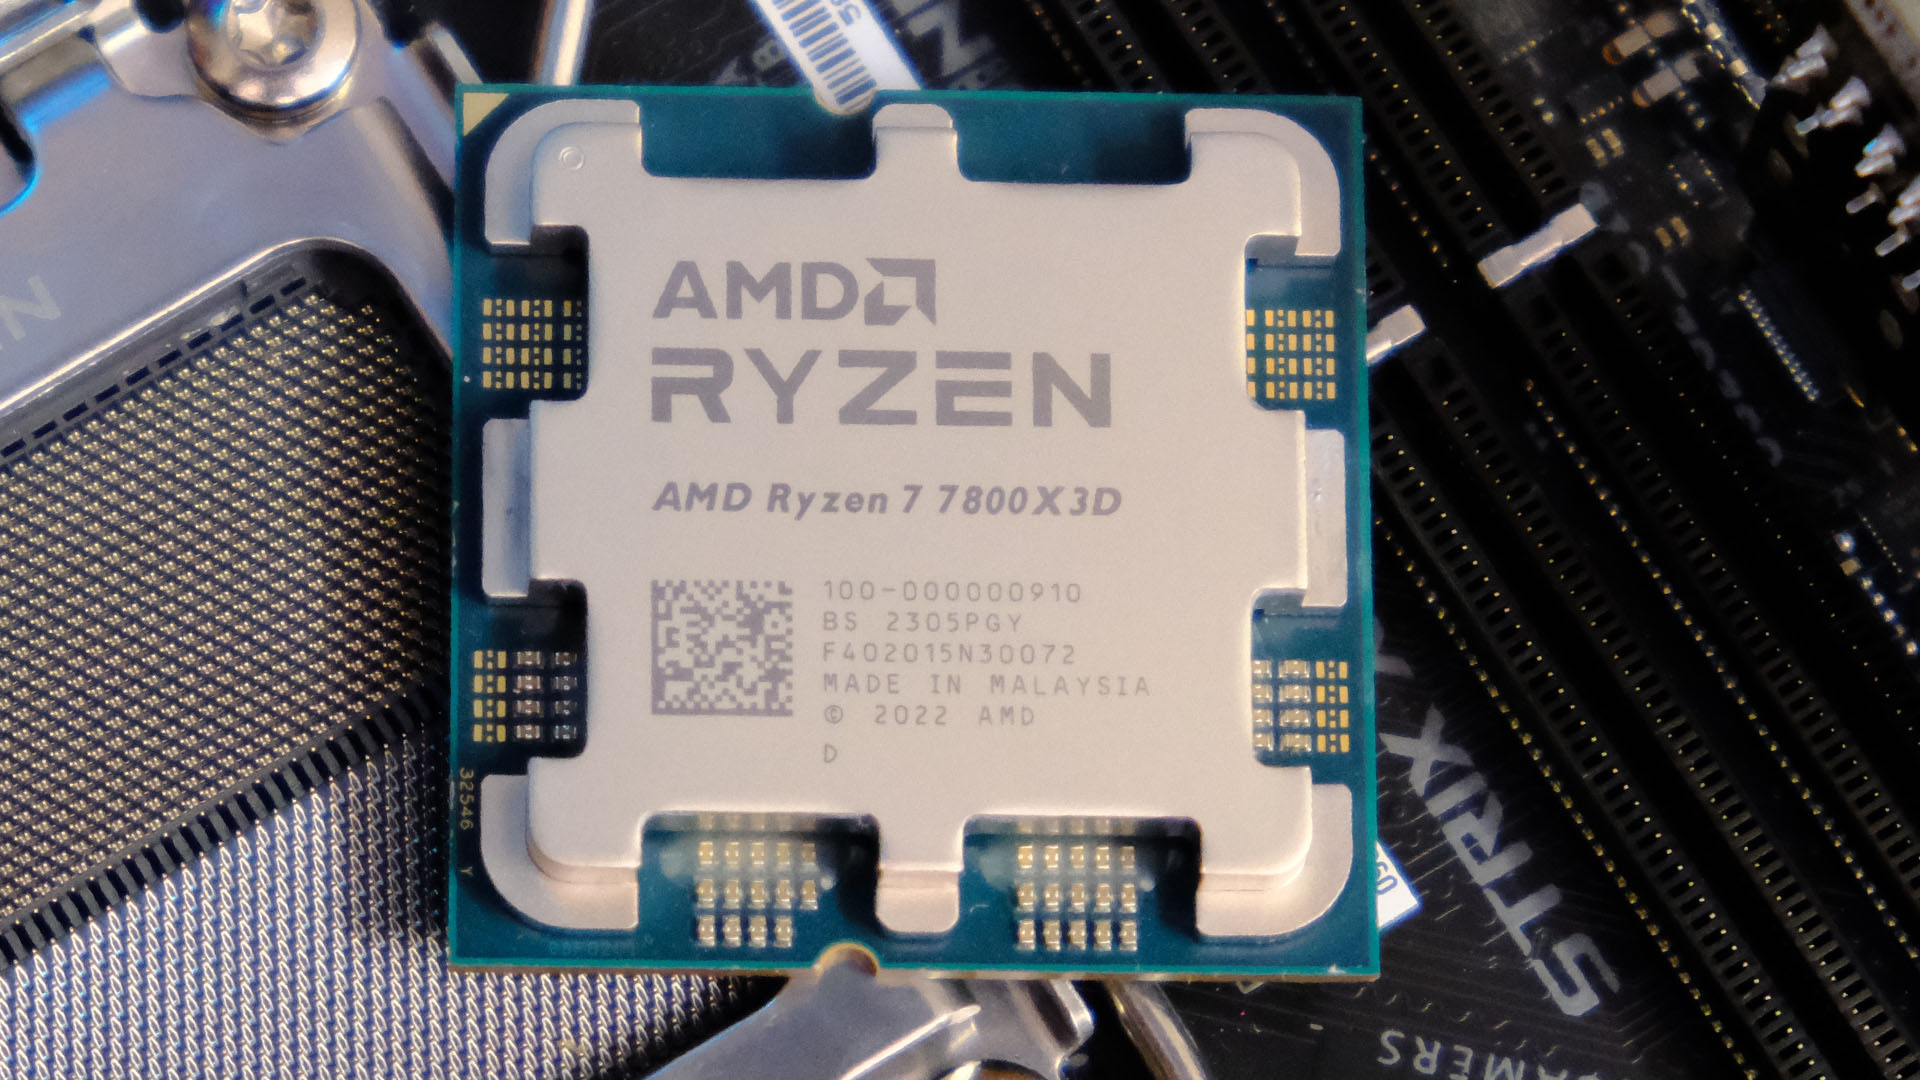 AMD Ryzen 7 7800X3D Reviews, Pros and Cons